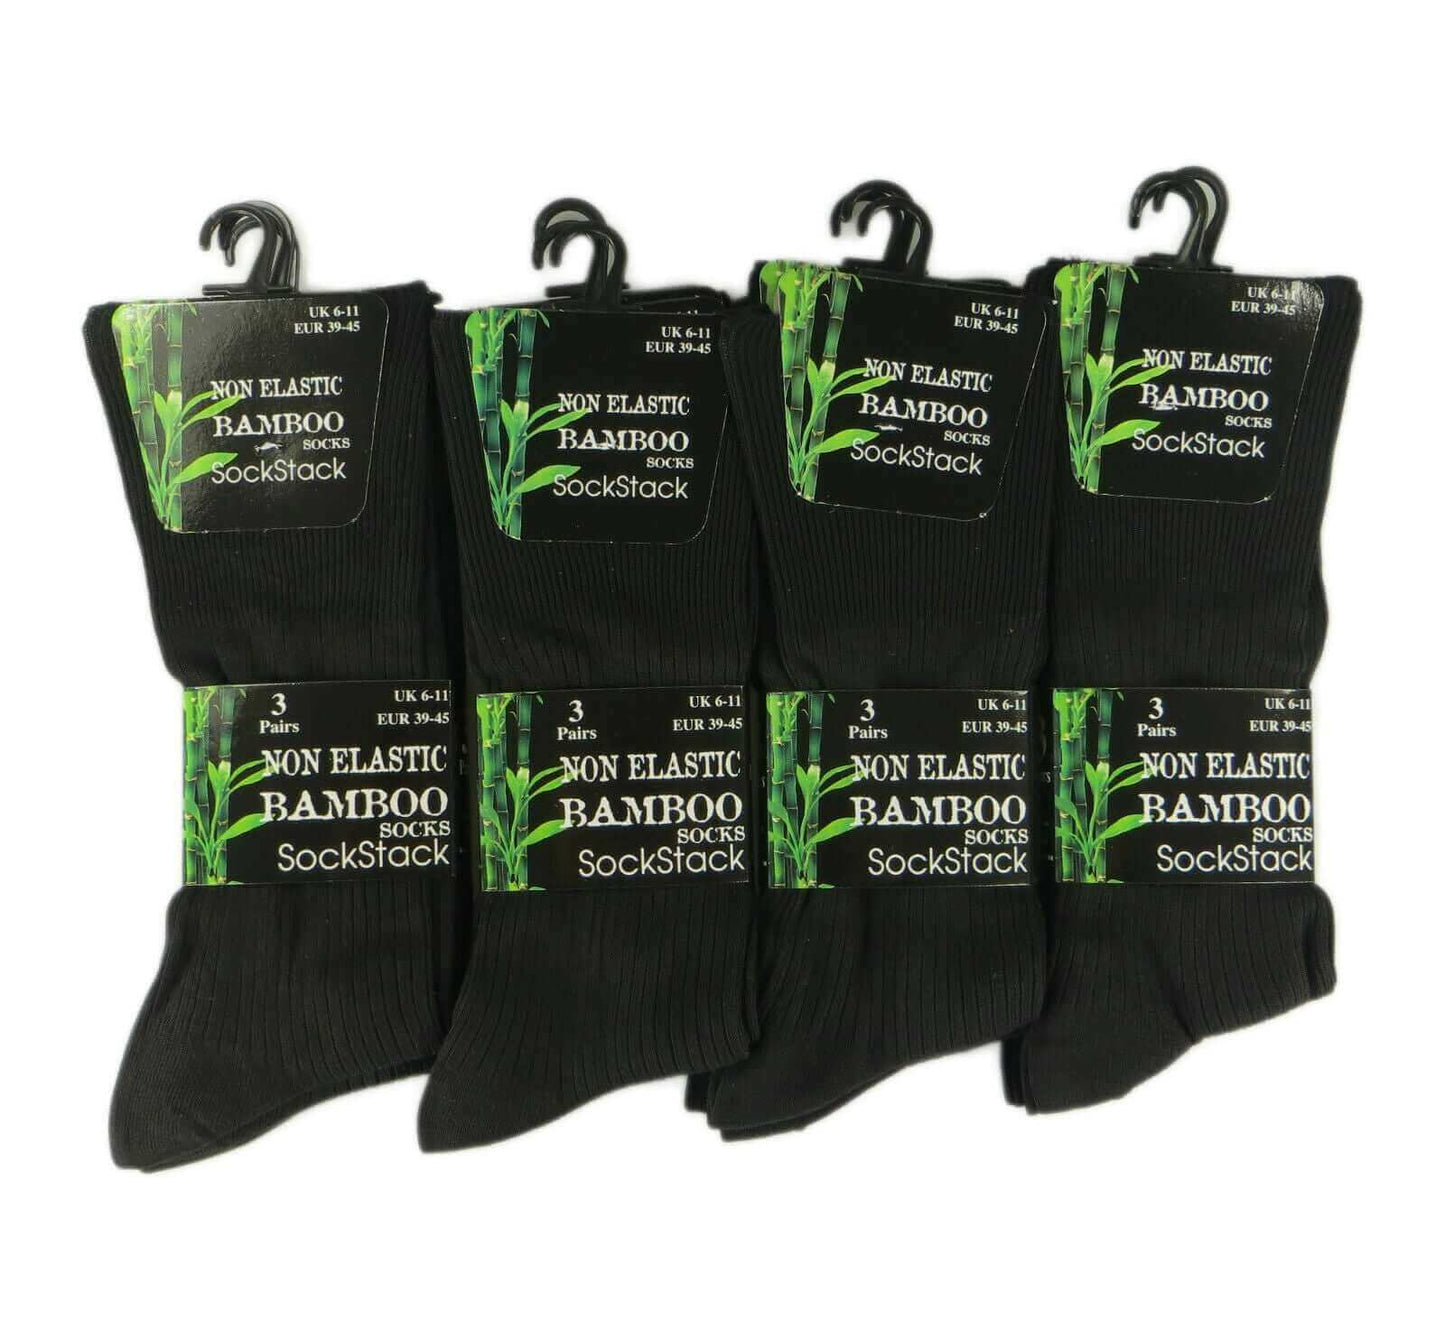 6 Pairs Of Men's Bamboo Loose Top Socks, Soft Grip Anti Bacterial Socks. Buy now for £7.00. A Socks by Sock Stack. 6-11, anti bacterial, anti blister, assorted, athletics, bamboo, baselayer, black, boys, comfortable, cosy, cotton, dark assorted, diabetic,